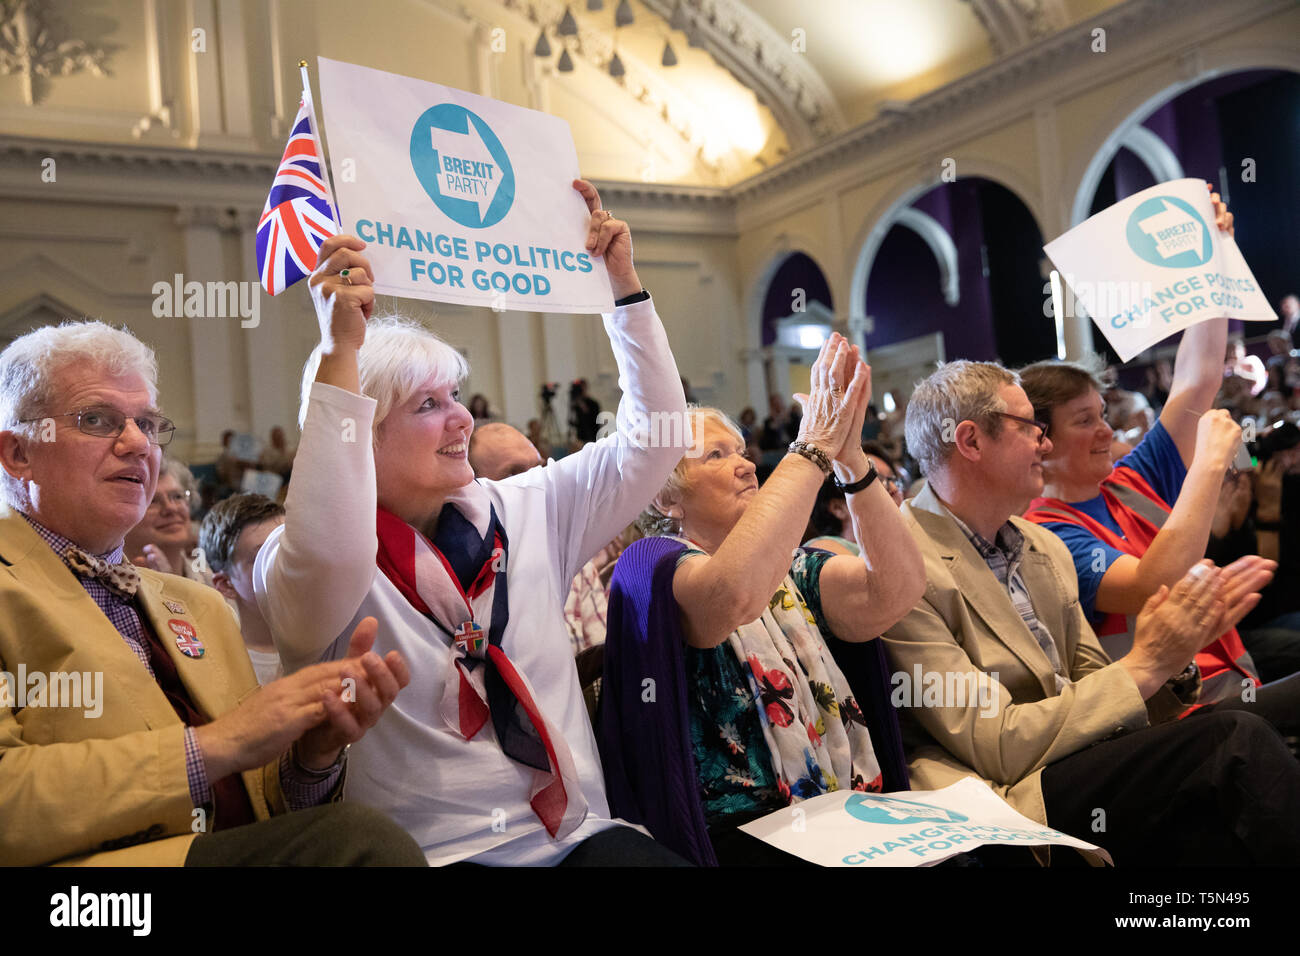 Brexit Party supporters at a rally held at Albert Hall Conference Centre, Nottingham. Nigel Farage joined by Annunziata Rees-Mogg, Richard Tice. Stock Photo